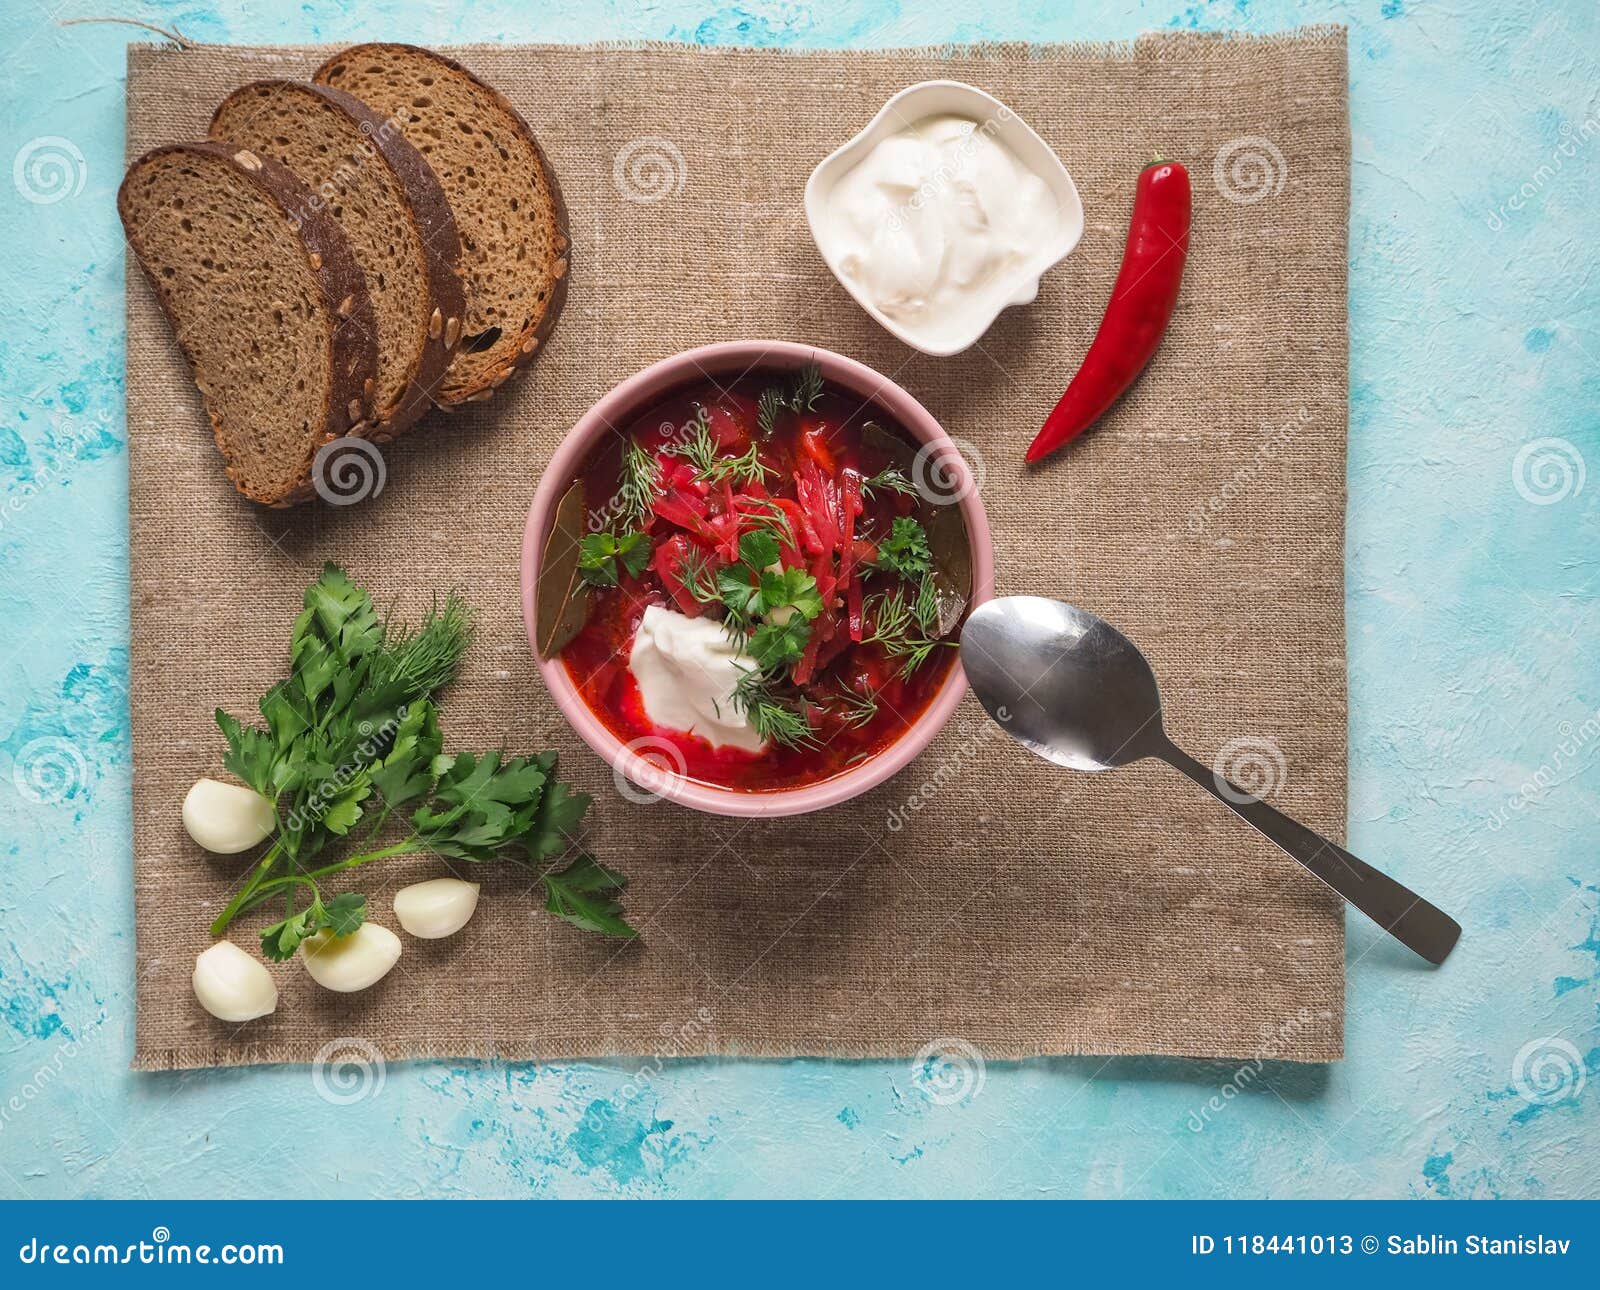 Homemade Russian, Ukrainian and Polish national soup - red borscht made of beetrot, vegetables and meat with sour cream.